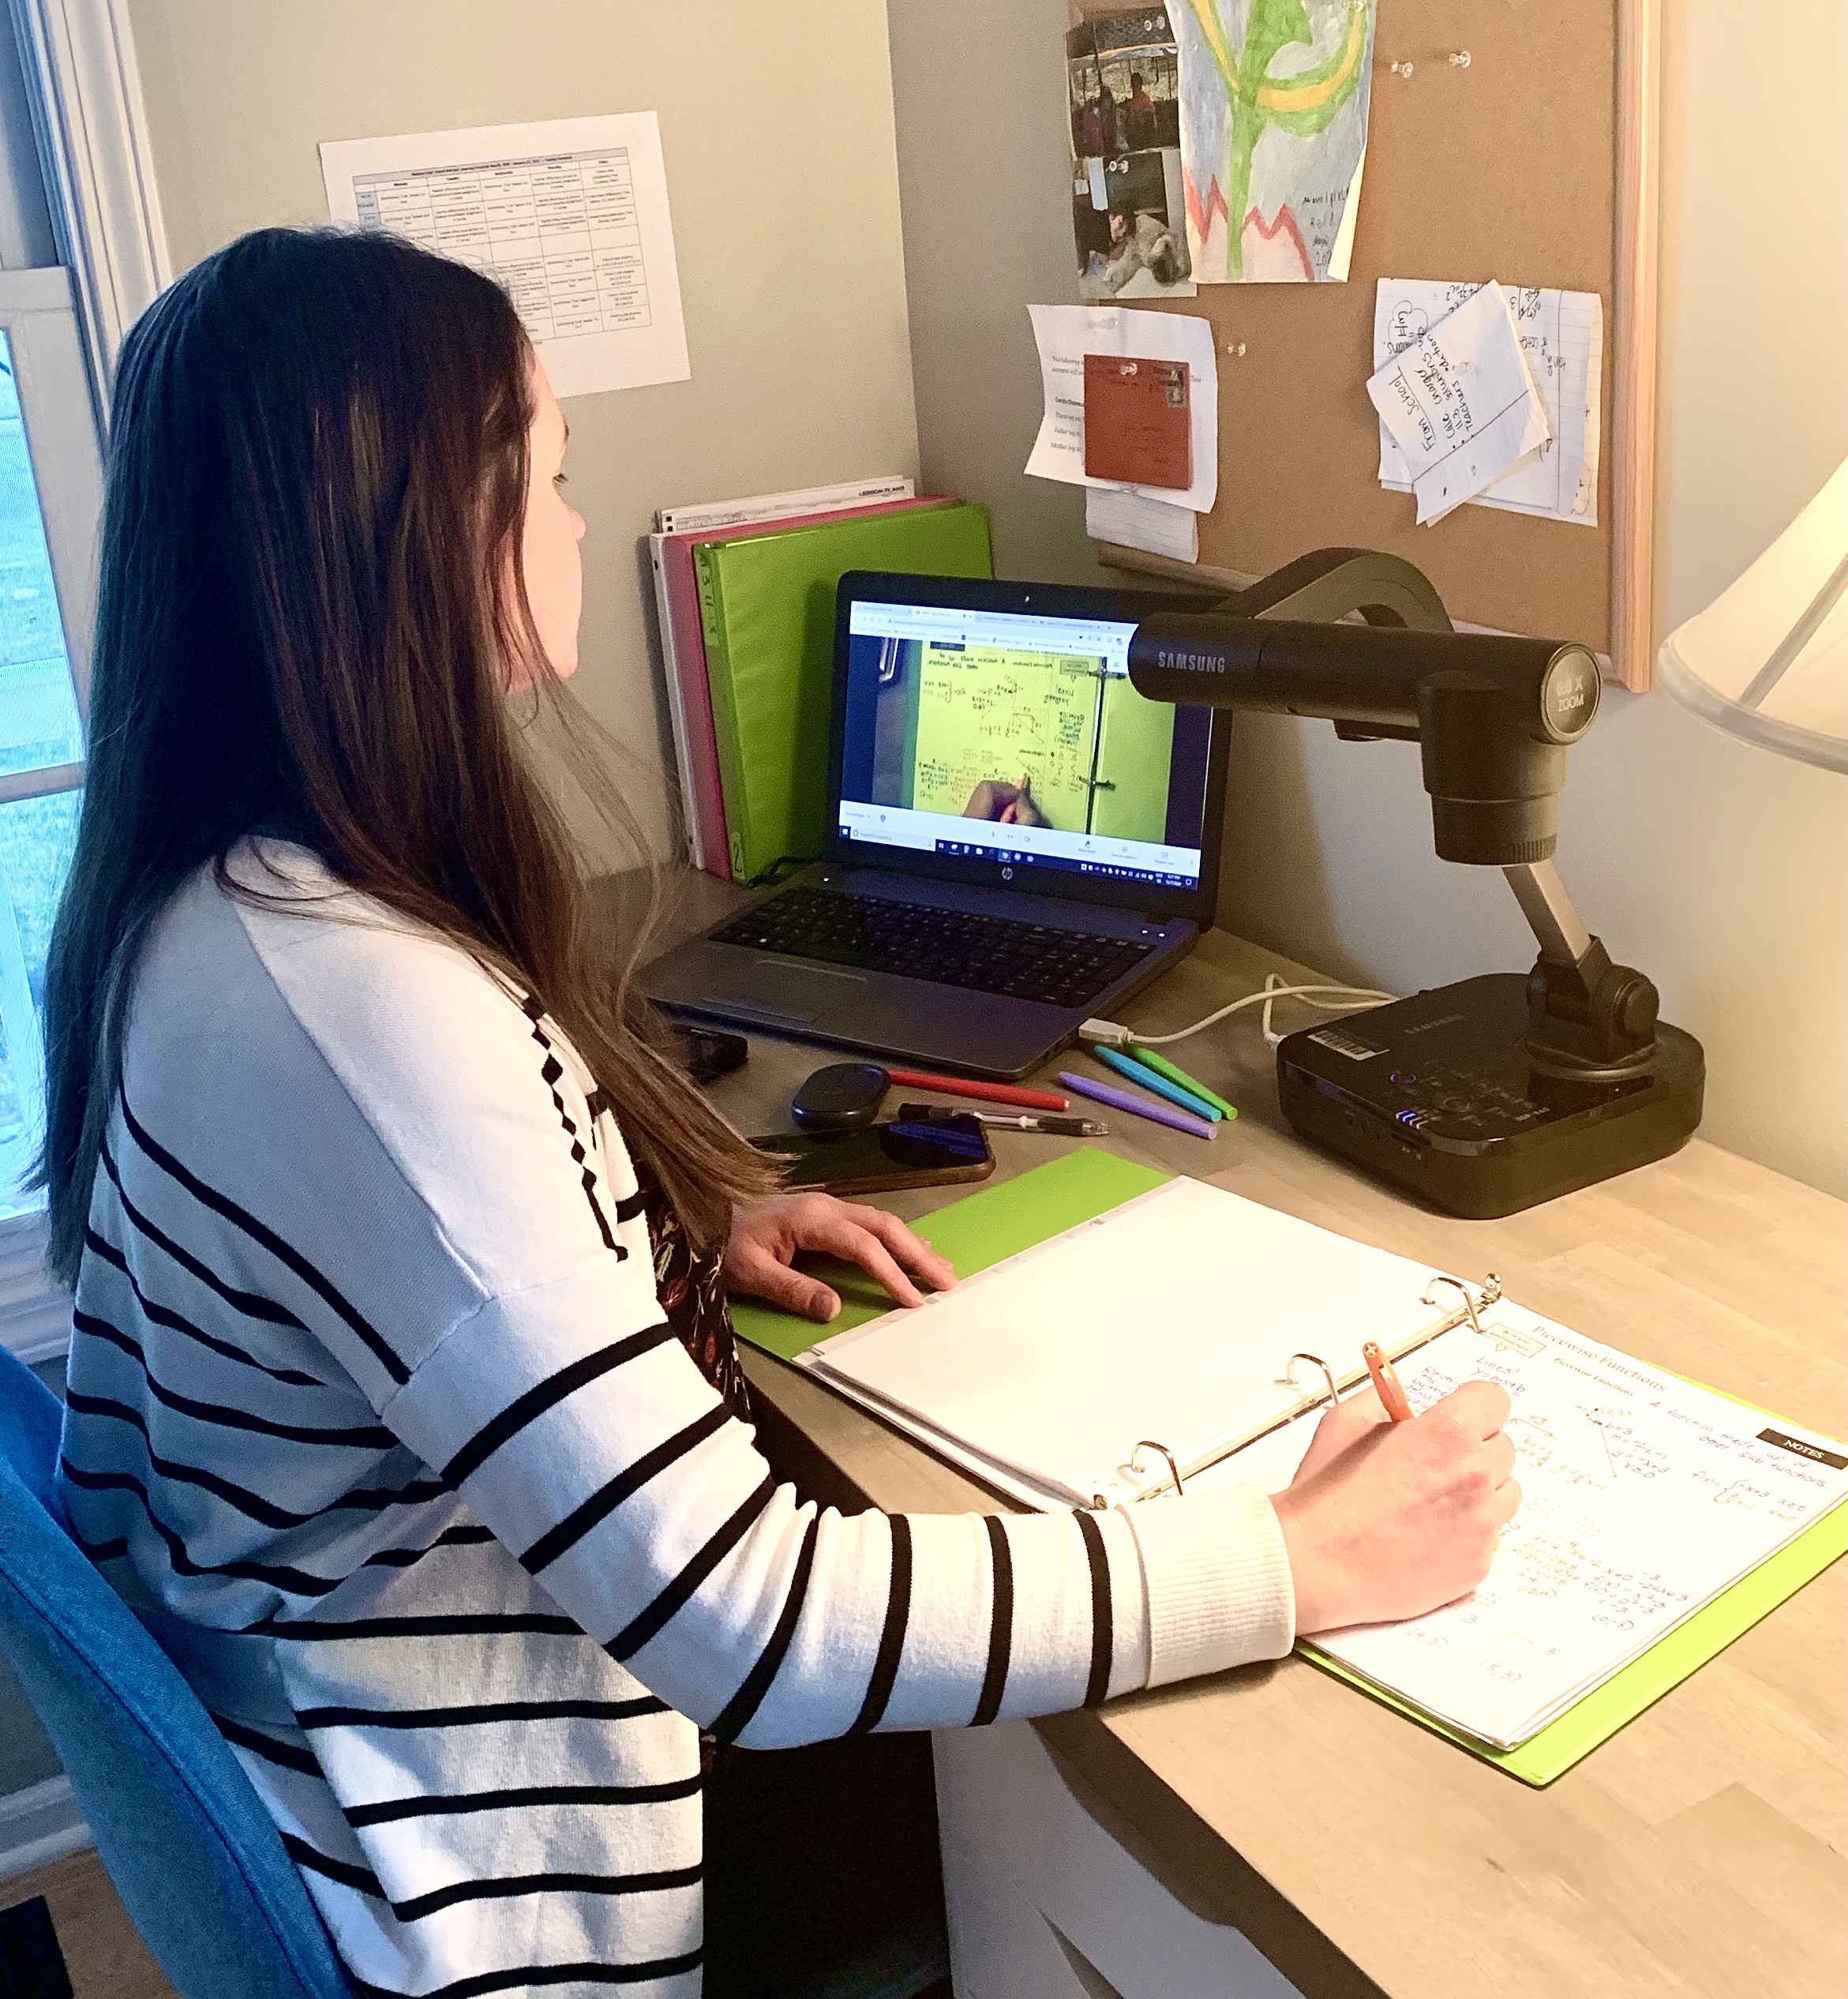 A teacher at Midland High School in Midland, Michigan, uses a document camera provided by Dow to share visuals in real-time with students.